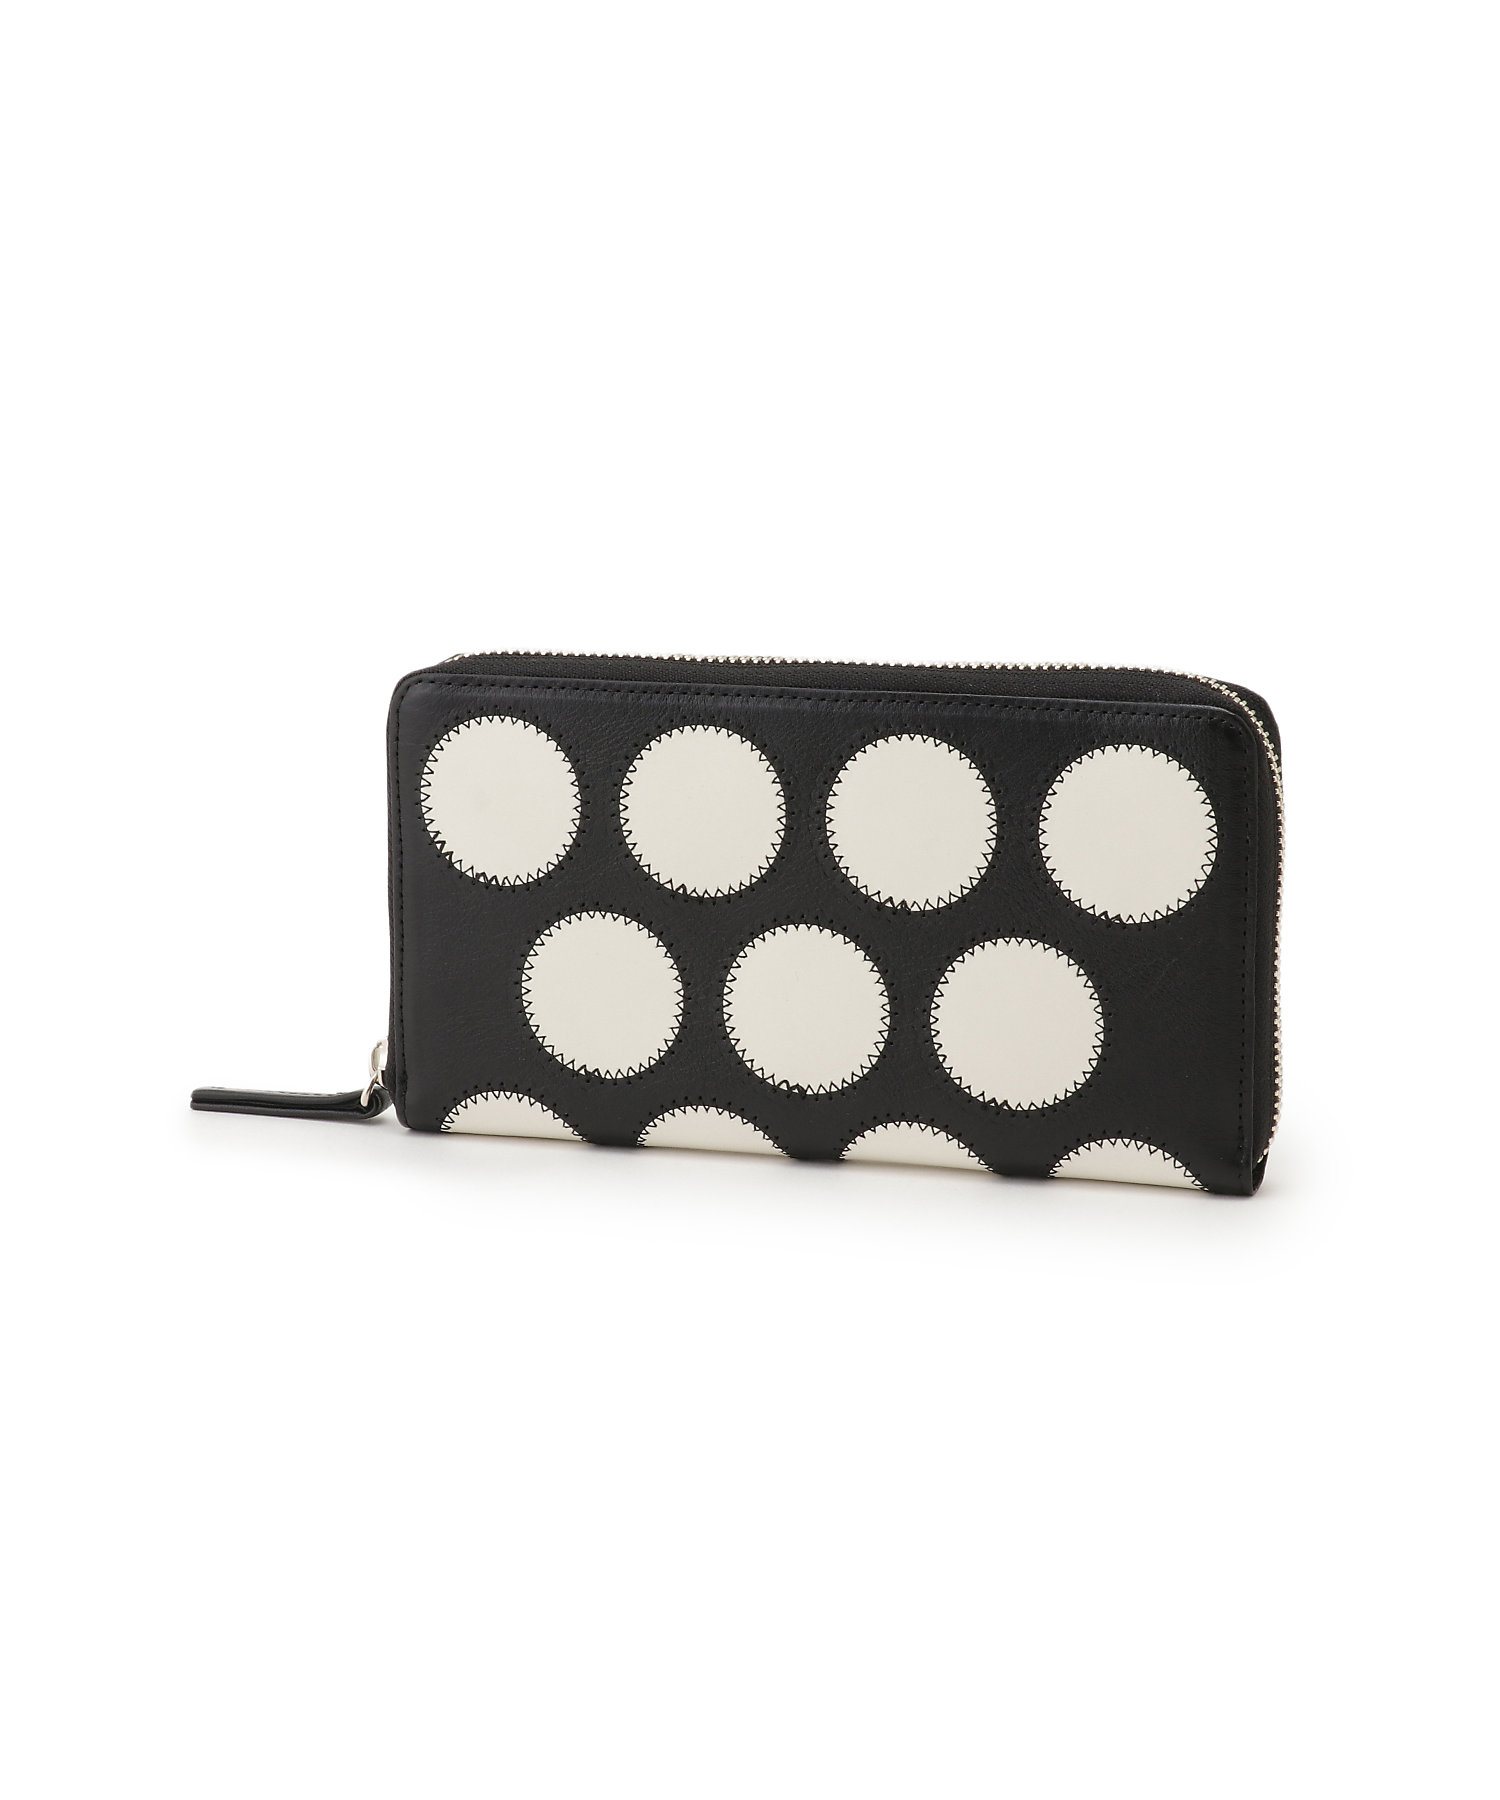 Y’s ワイズ DOT PATCHWORK LEATHER LONG WALLET 39,600円